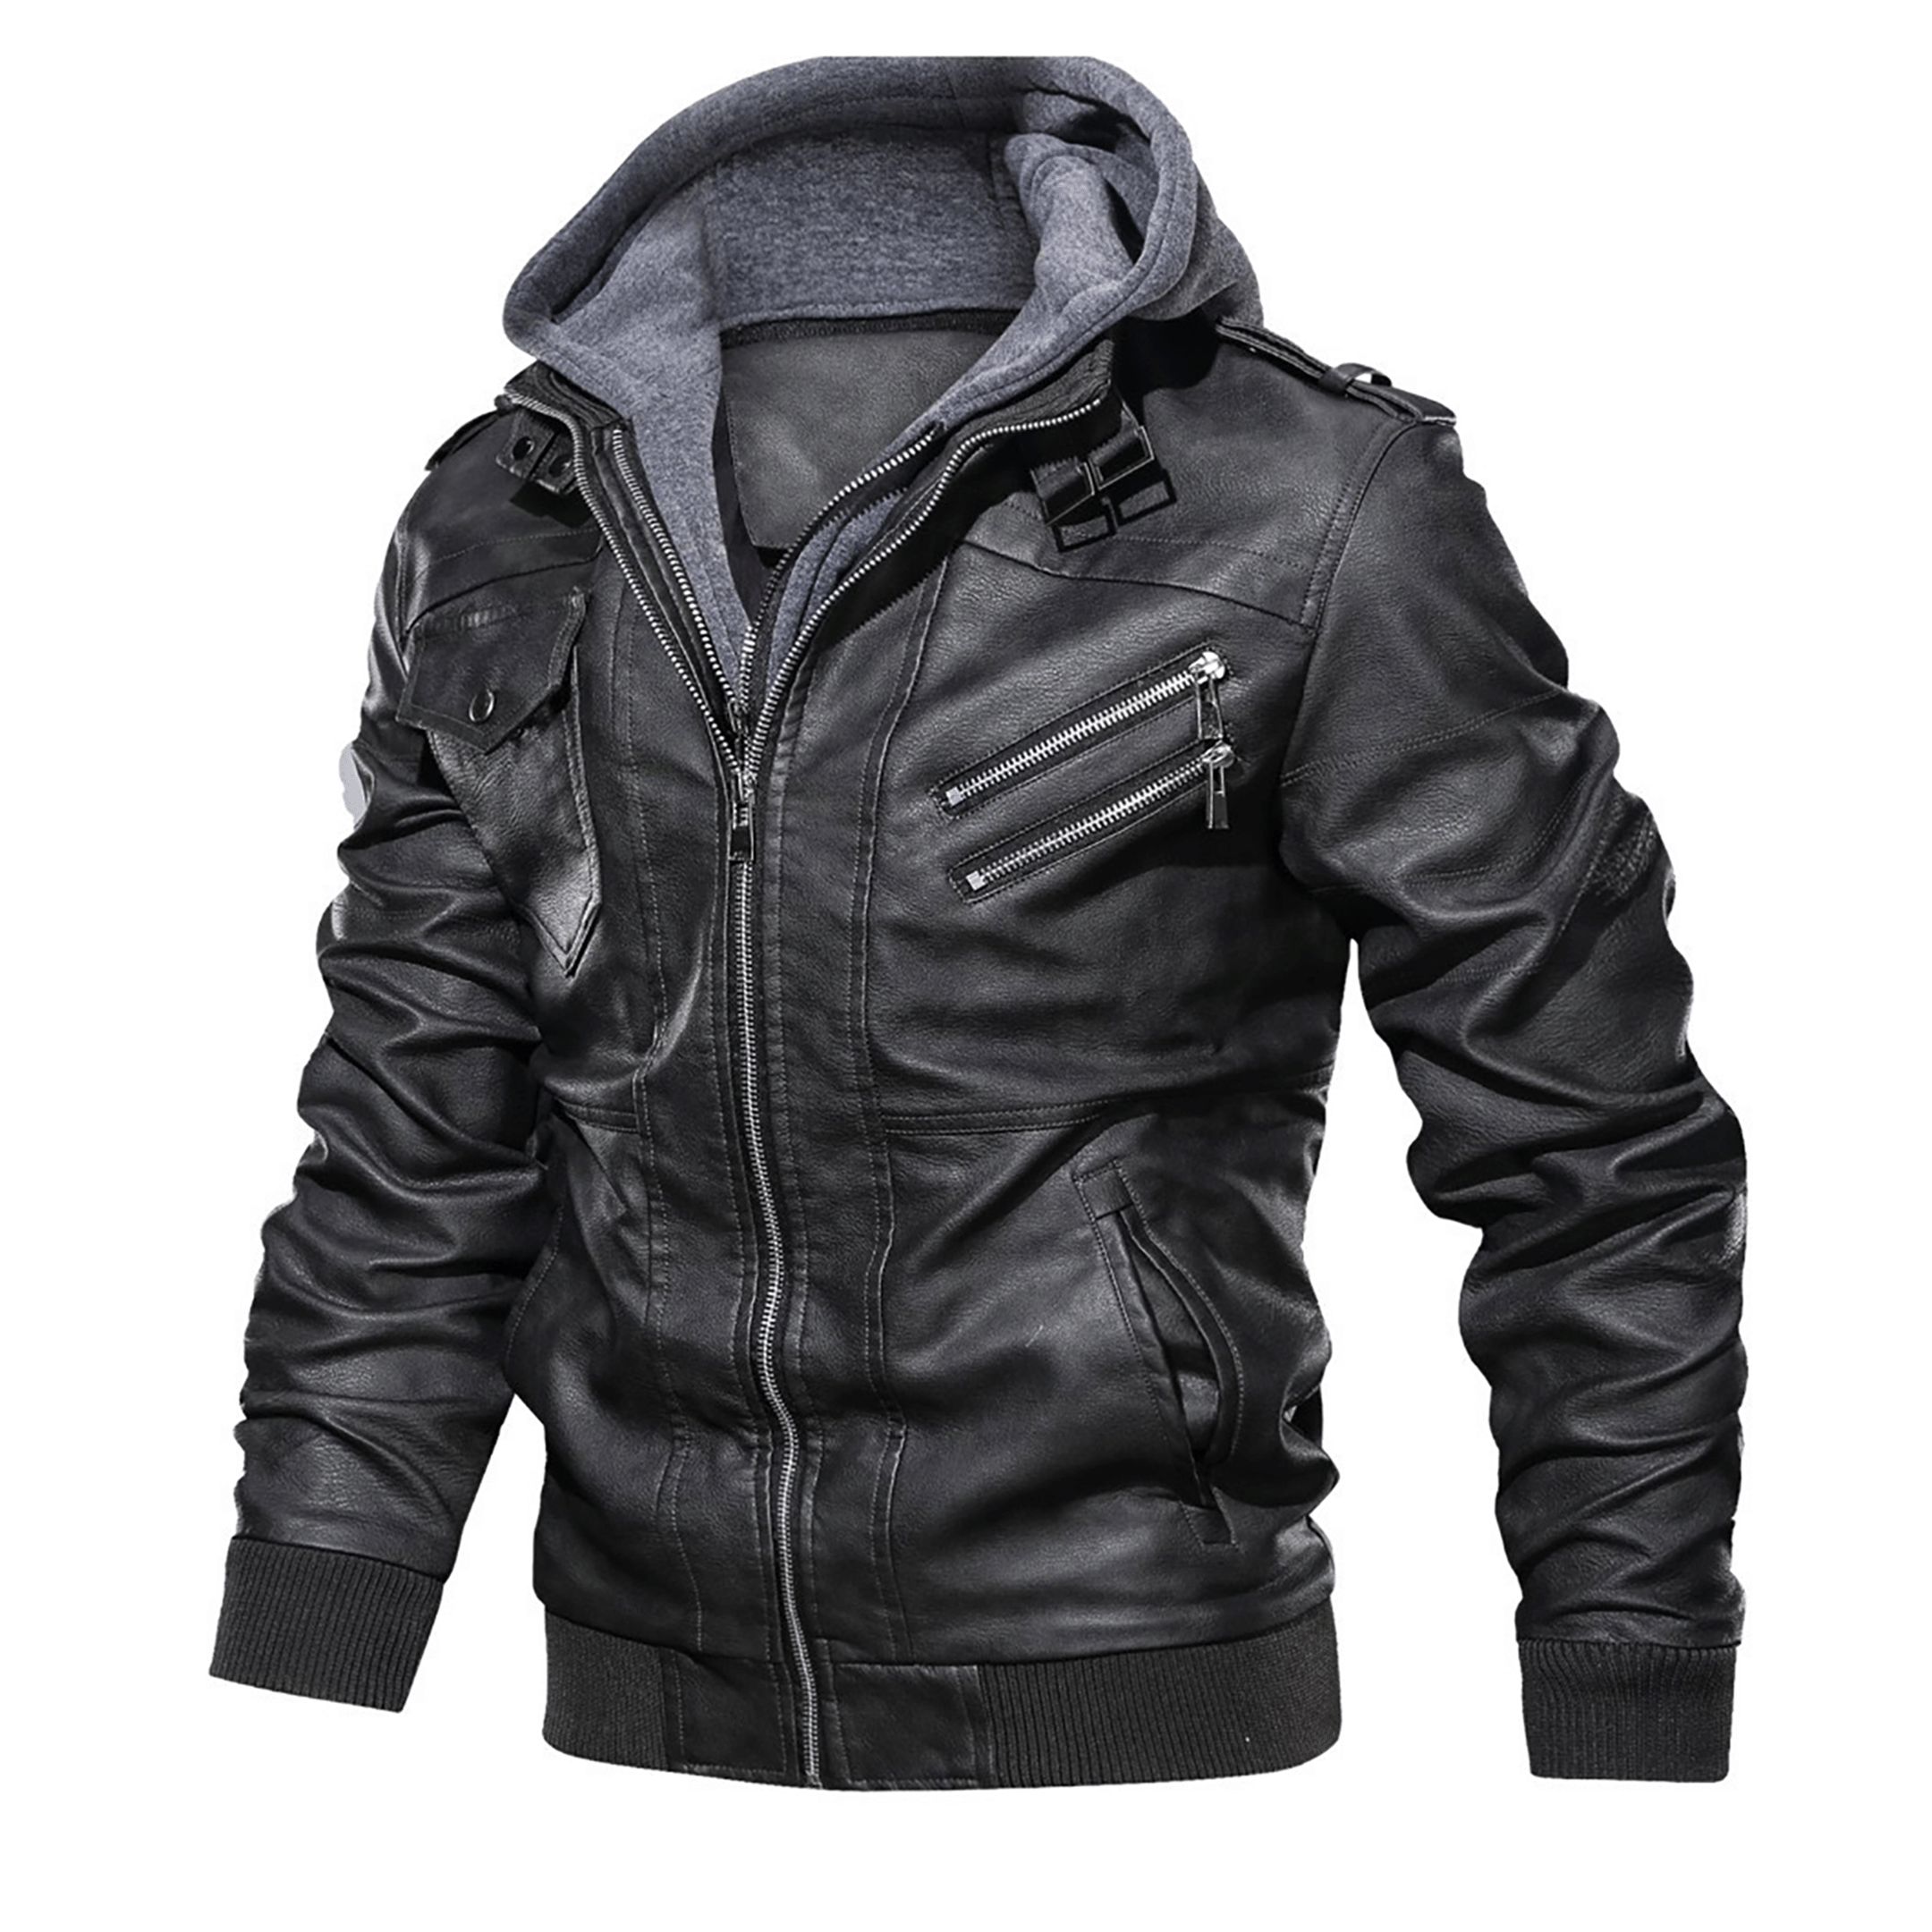 Top leather jackets and latest products 239